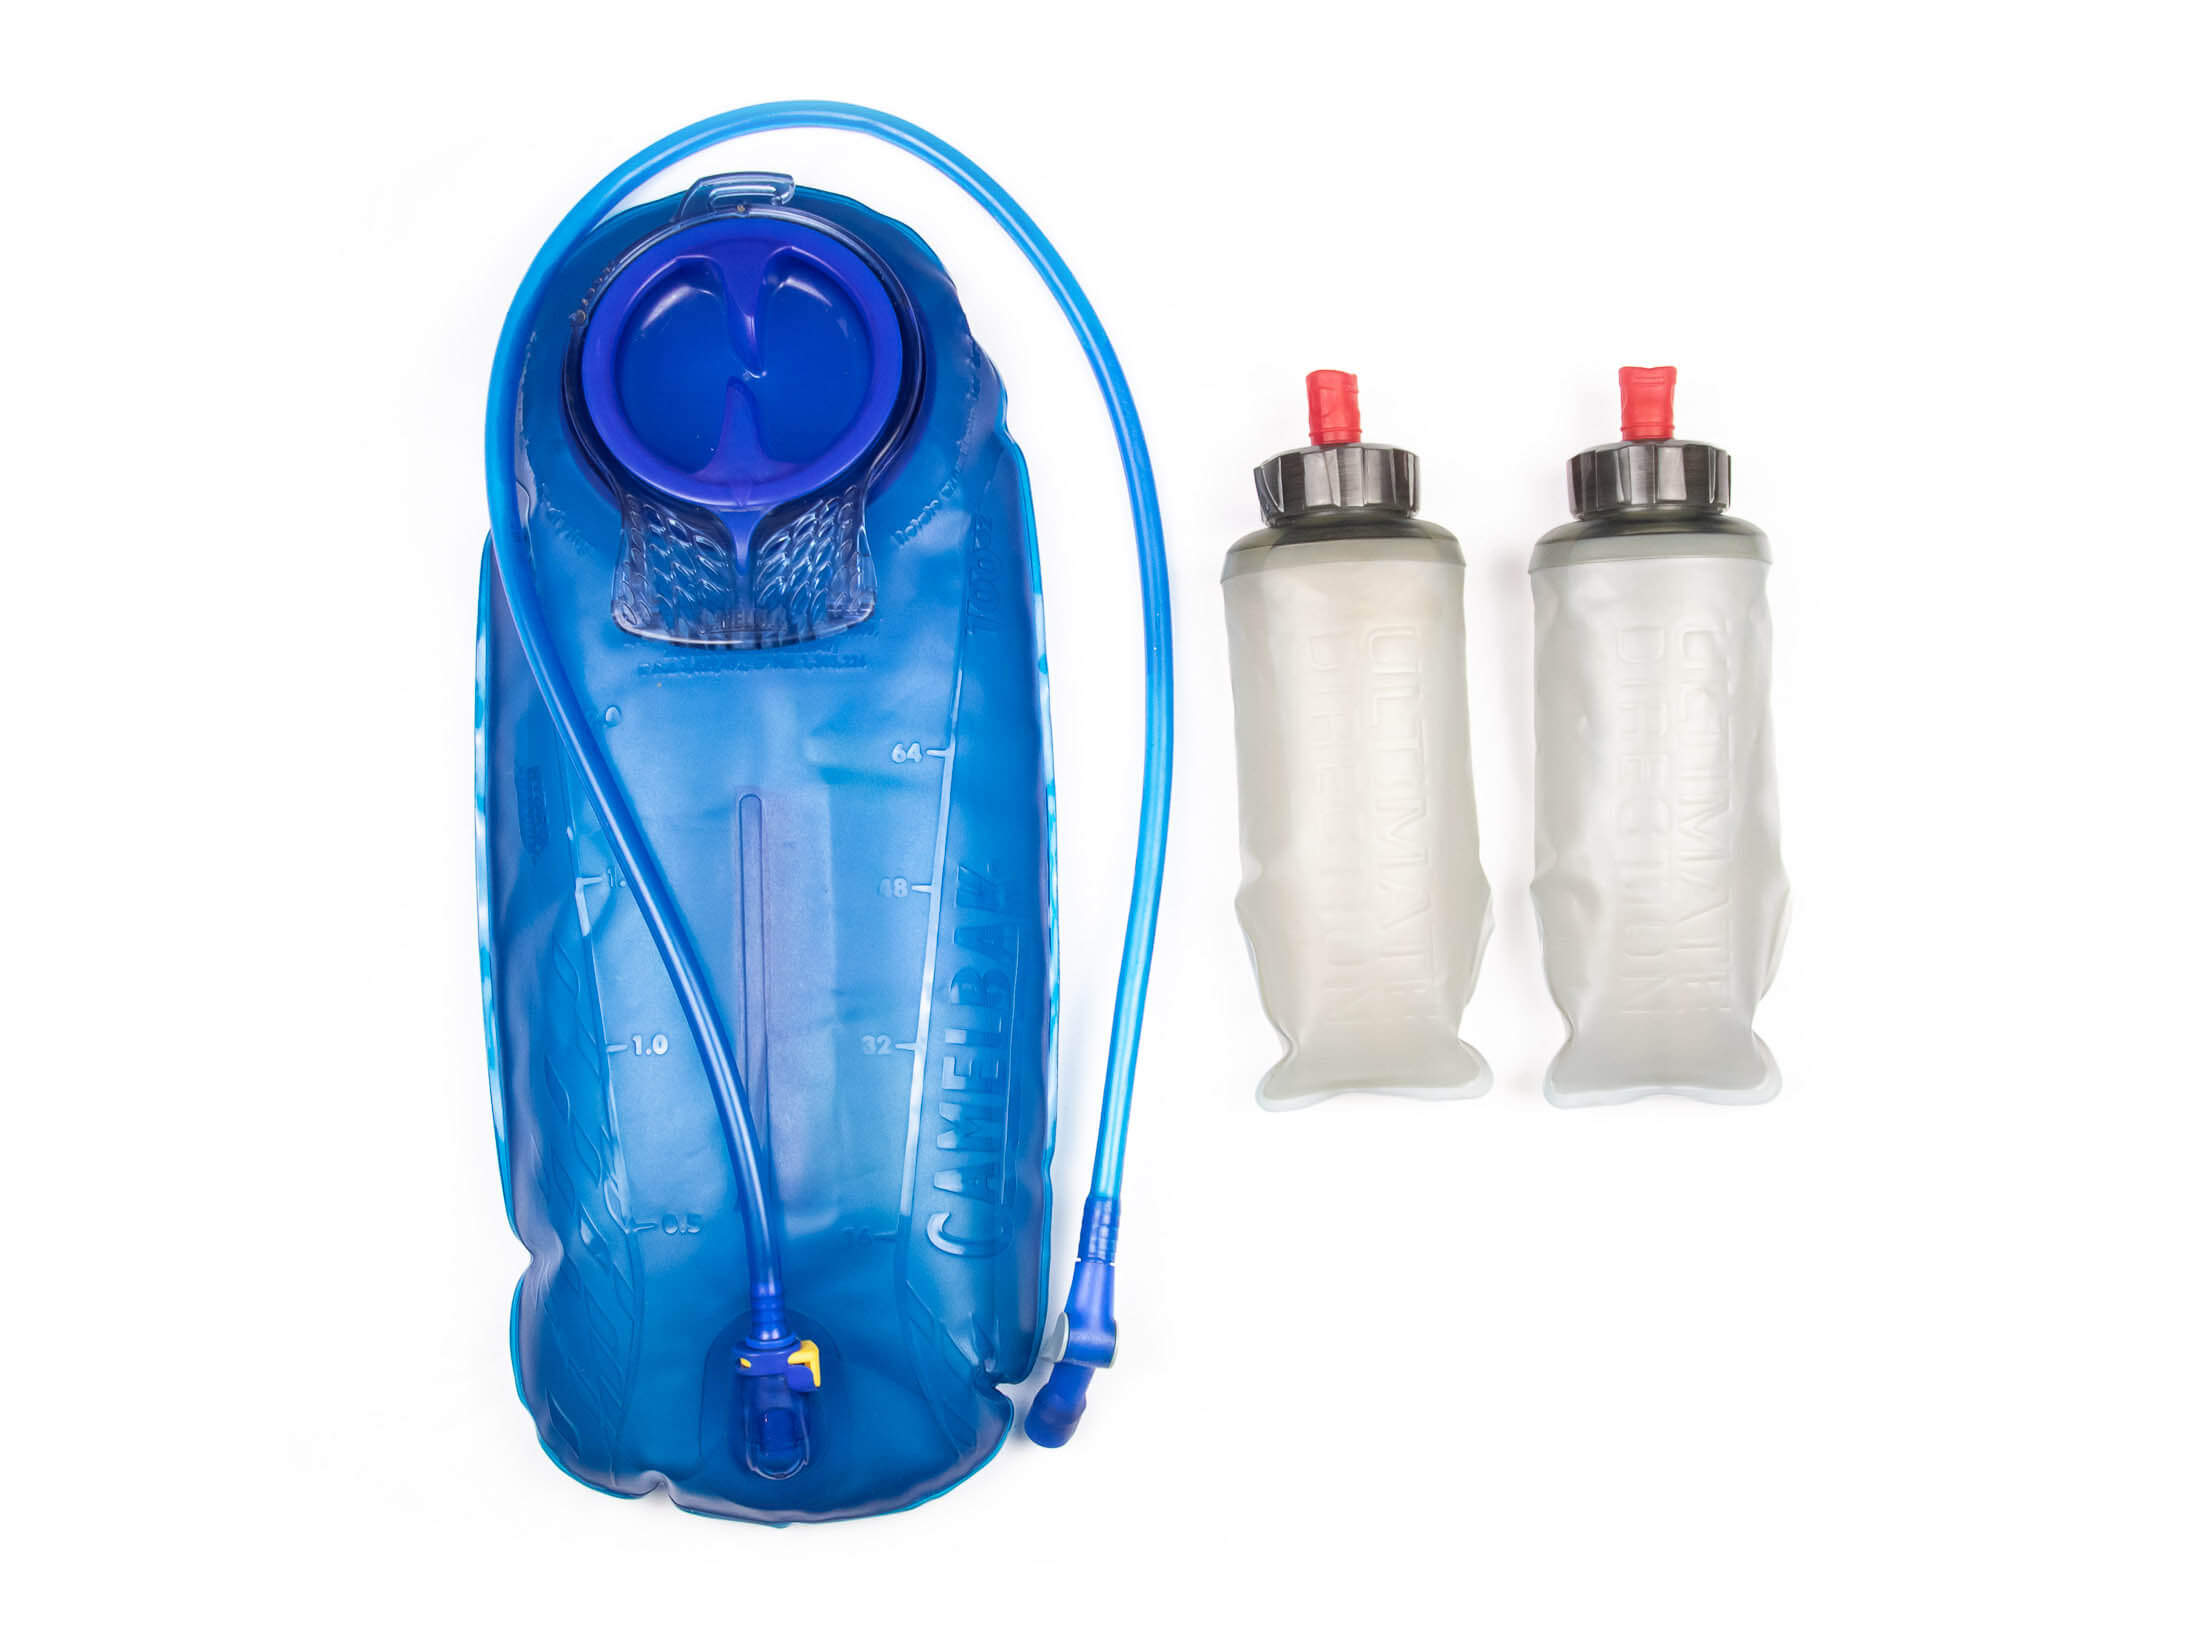 hydration reservoir next to two water bottles